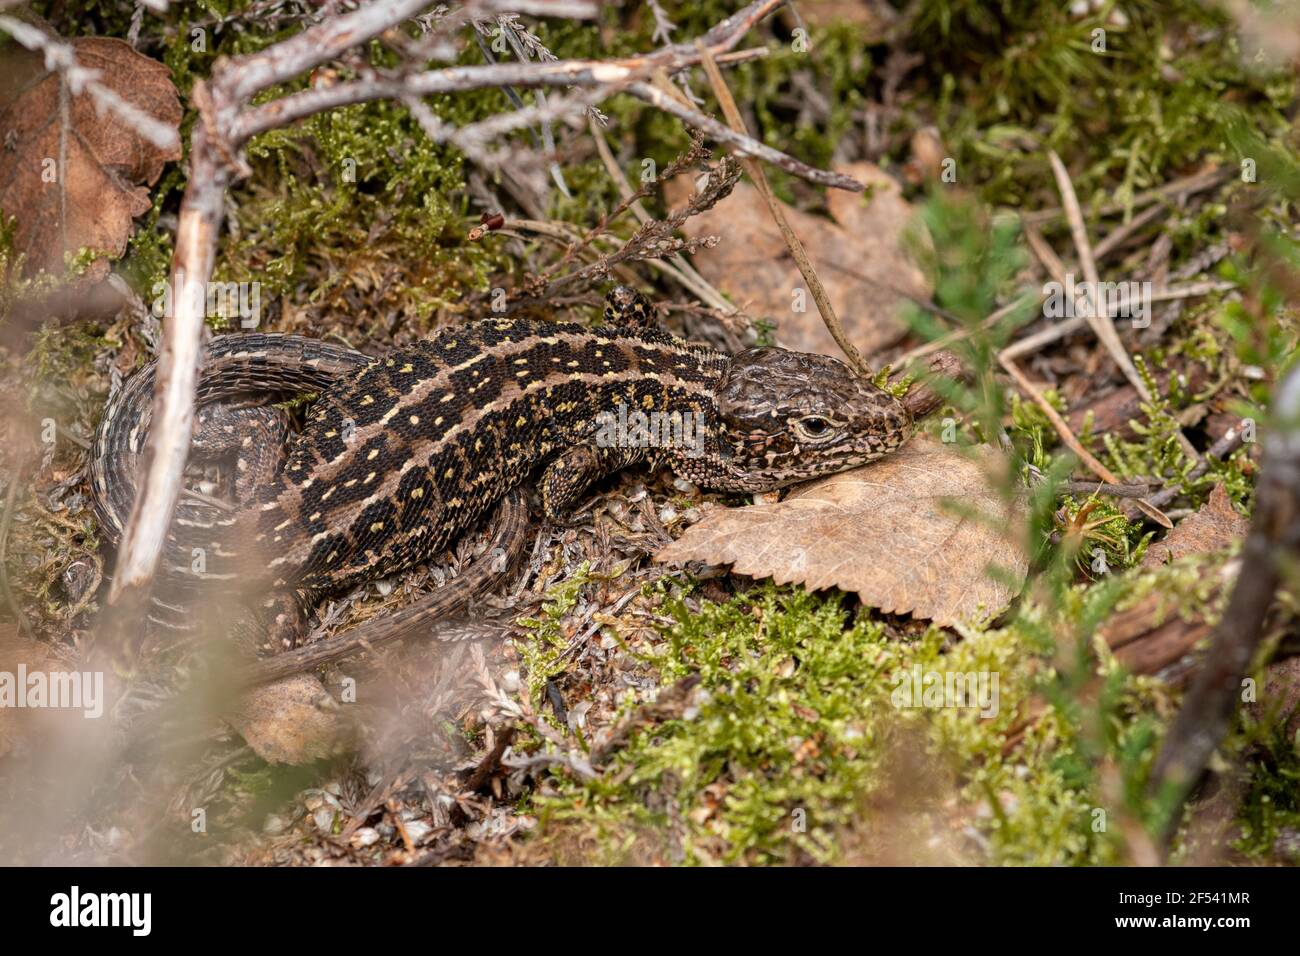 Male sand lizard (Lacerta agilis) in Hampshire heathland, UK. Taken in March soon after emergence from hibernation. Stock Photo